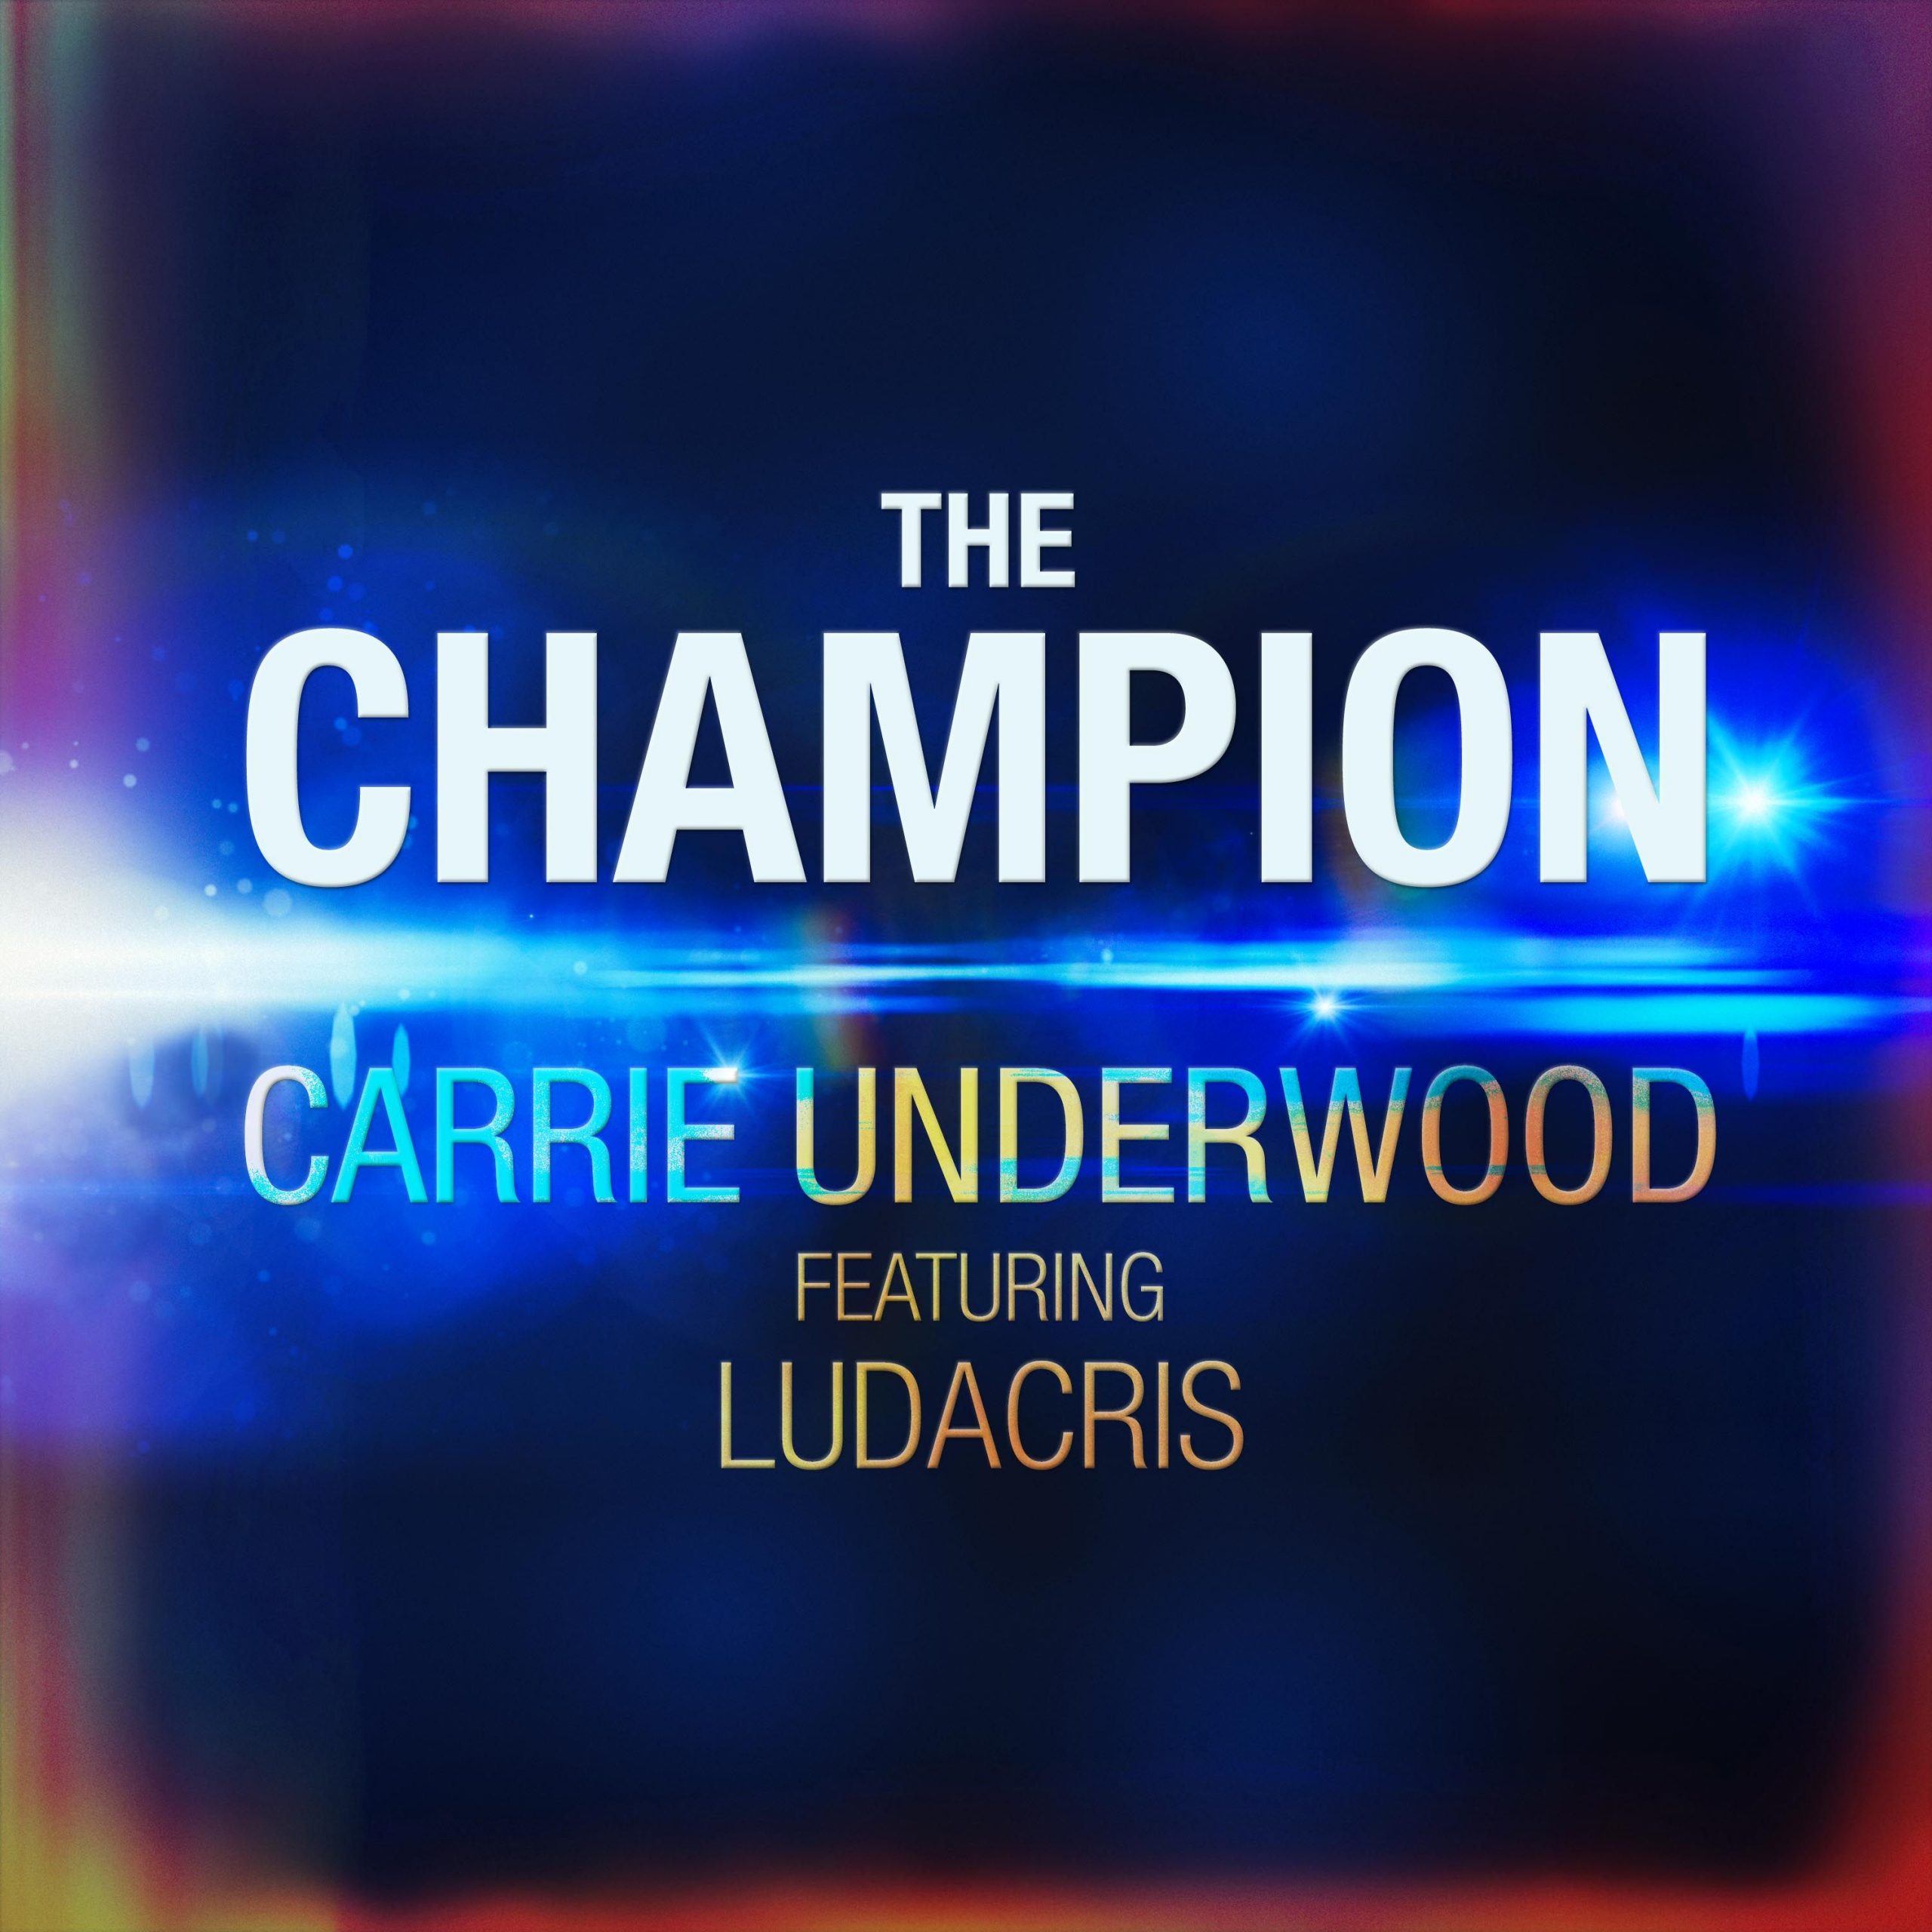 CARRIE UNDERWOOD PENS AND RECORDS ANTHEMIC “THE CHAMPION” FOR NBC’S SUPER BOWL LII SHOW OPEN